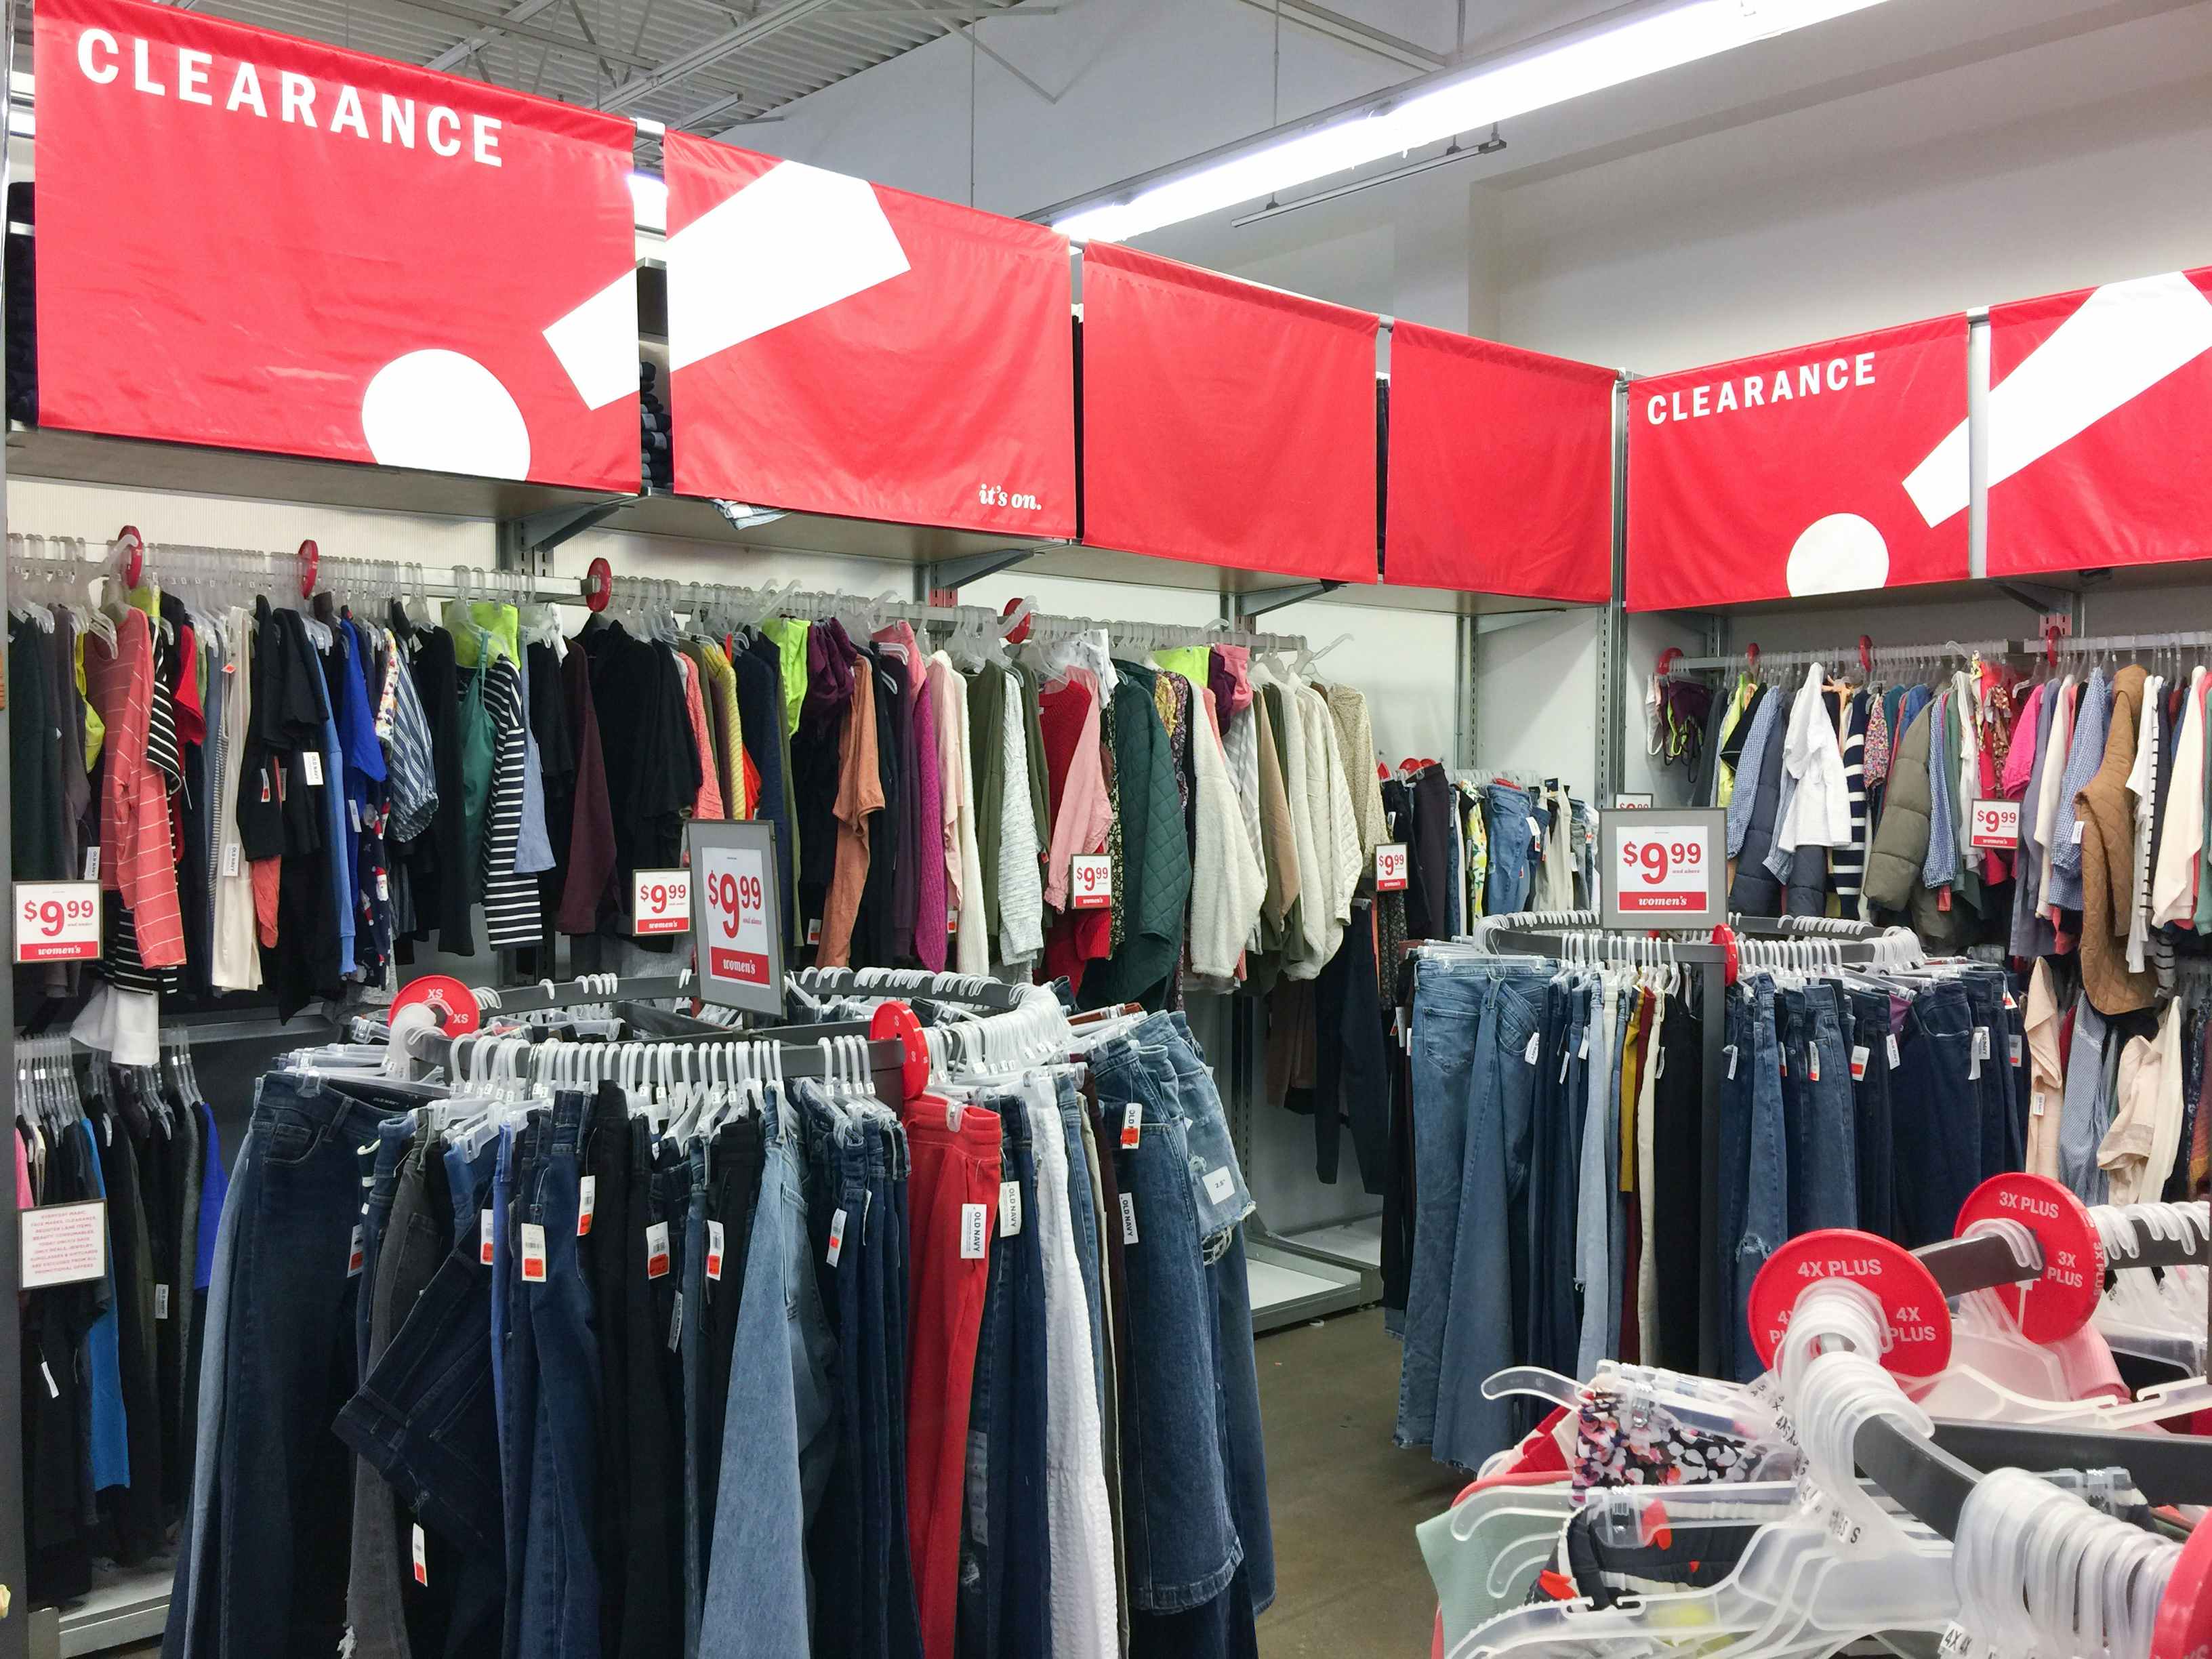 A view of the clearance section inside Old Navy.